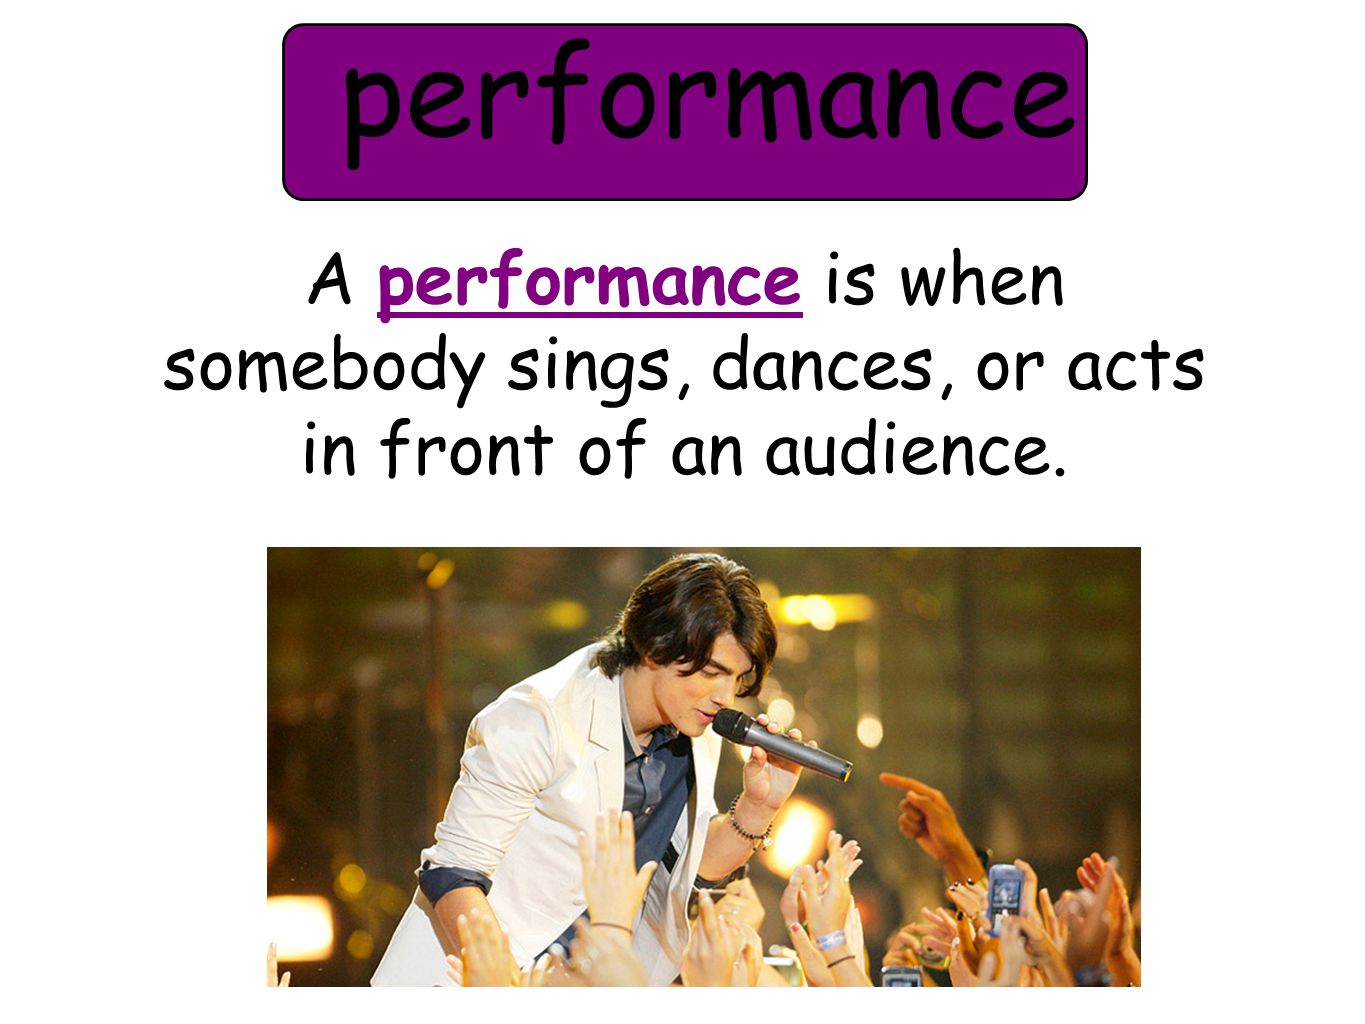 performance A performance is when somebody sings, dances, or acts in front of an audience.